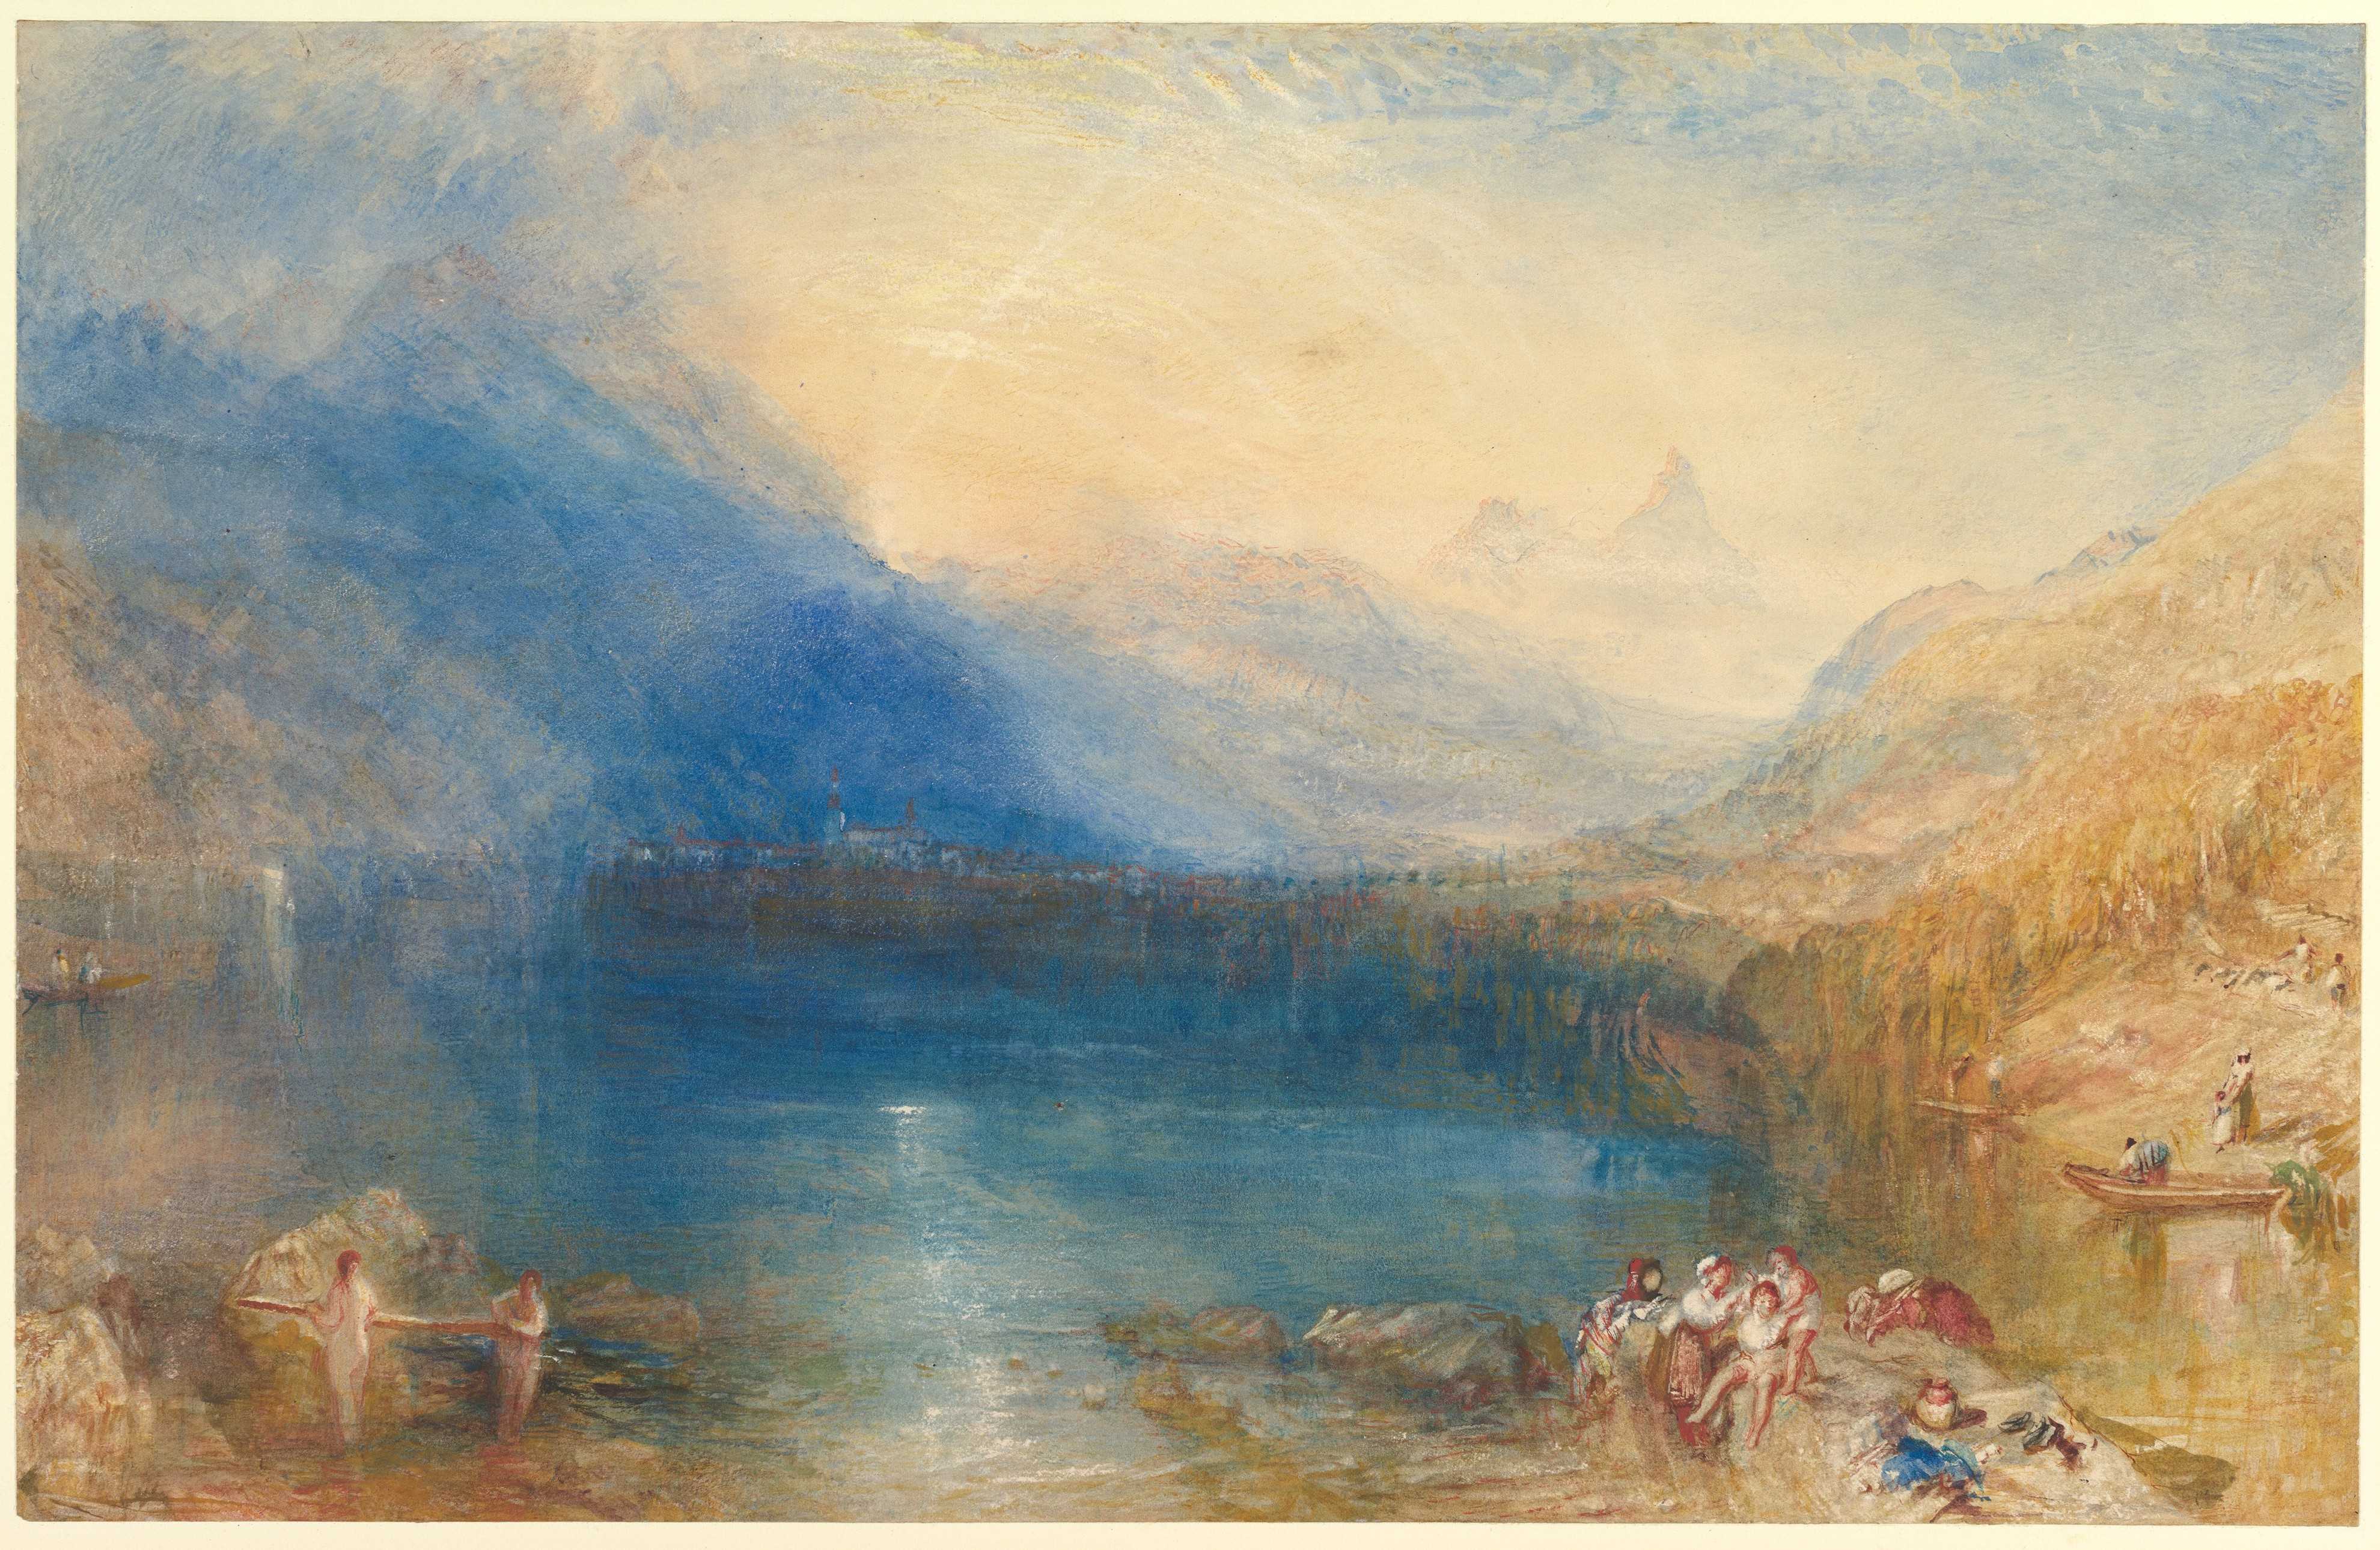 Find out more about J. M. W. Turner - The Lake of Zug